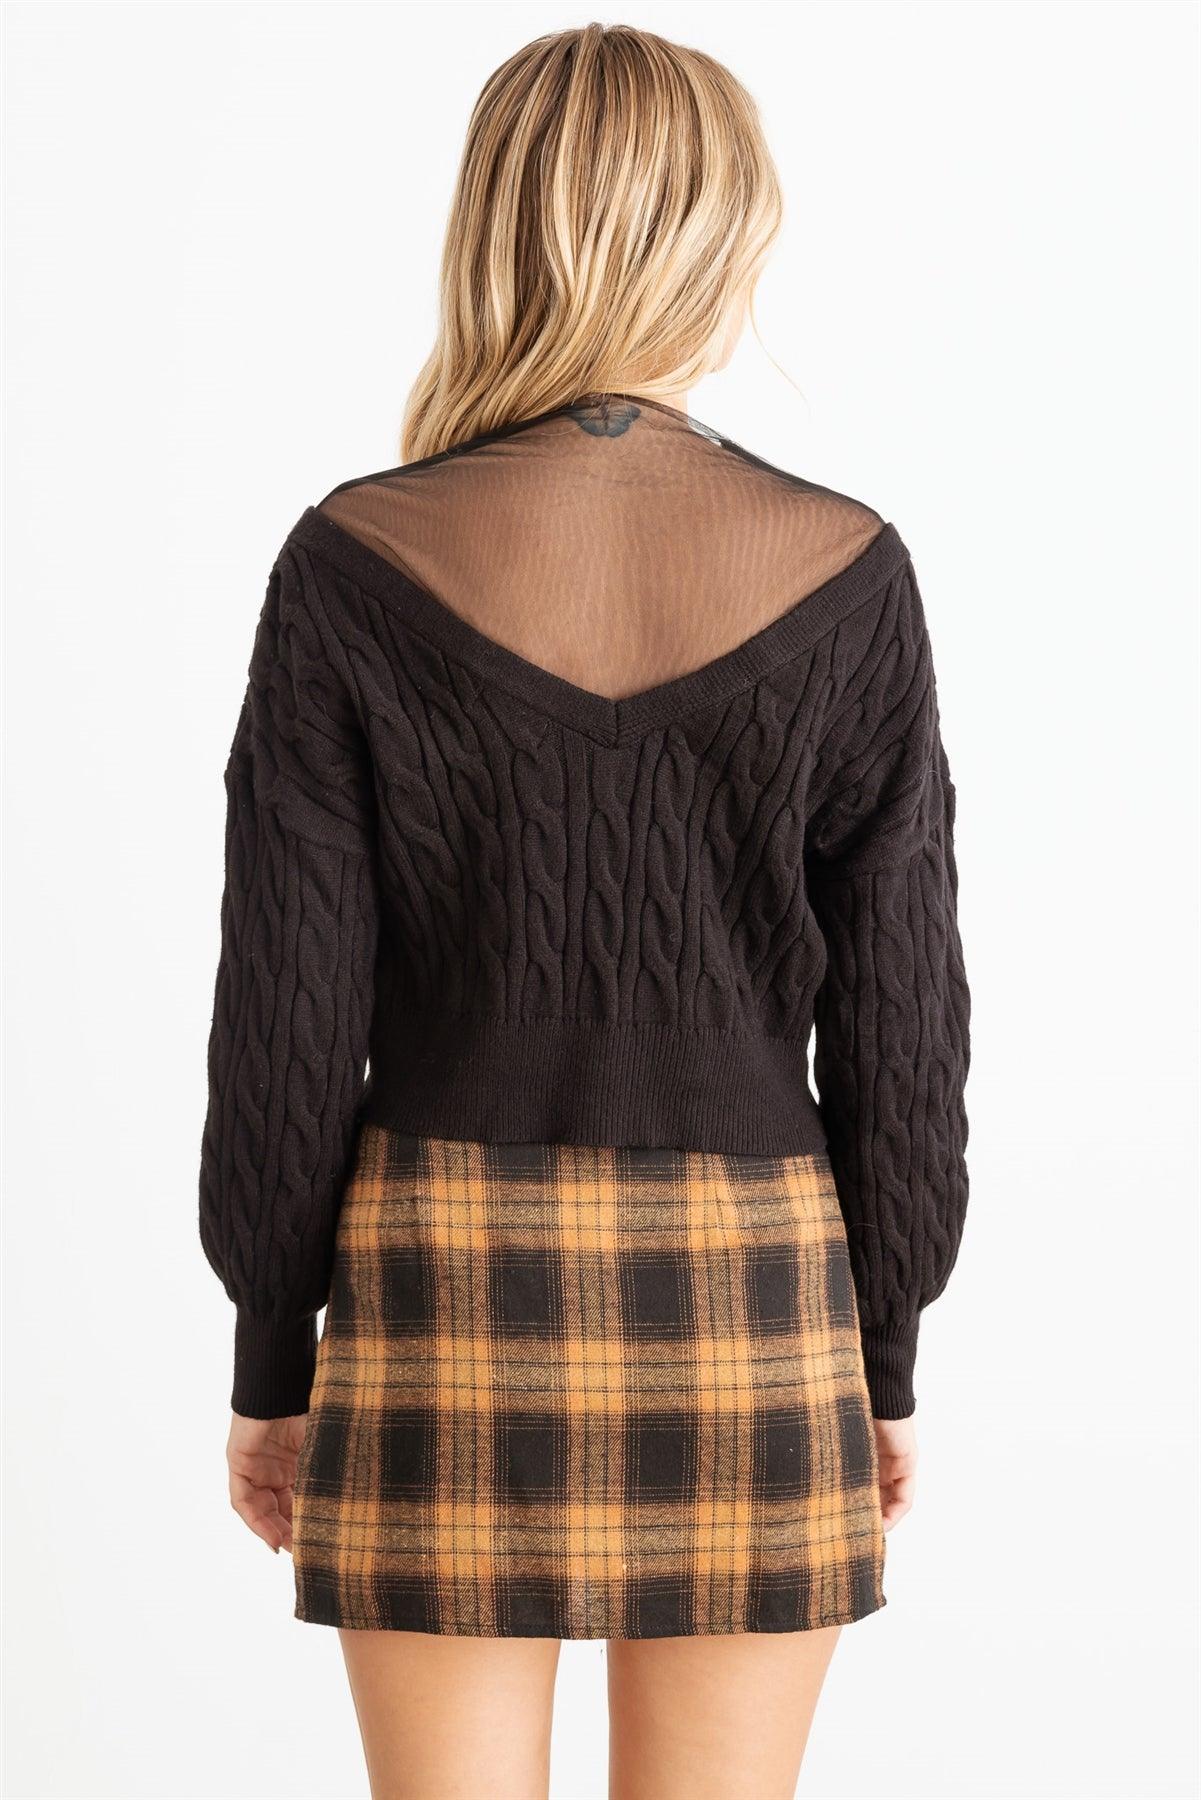 Black Cable Knit & Mesh Rhinestone Button-Up Sweater/Cardigan back